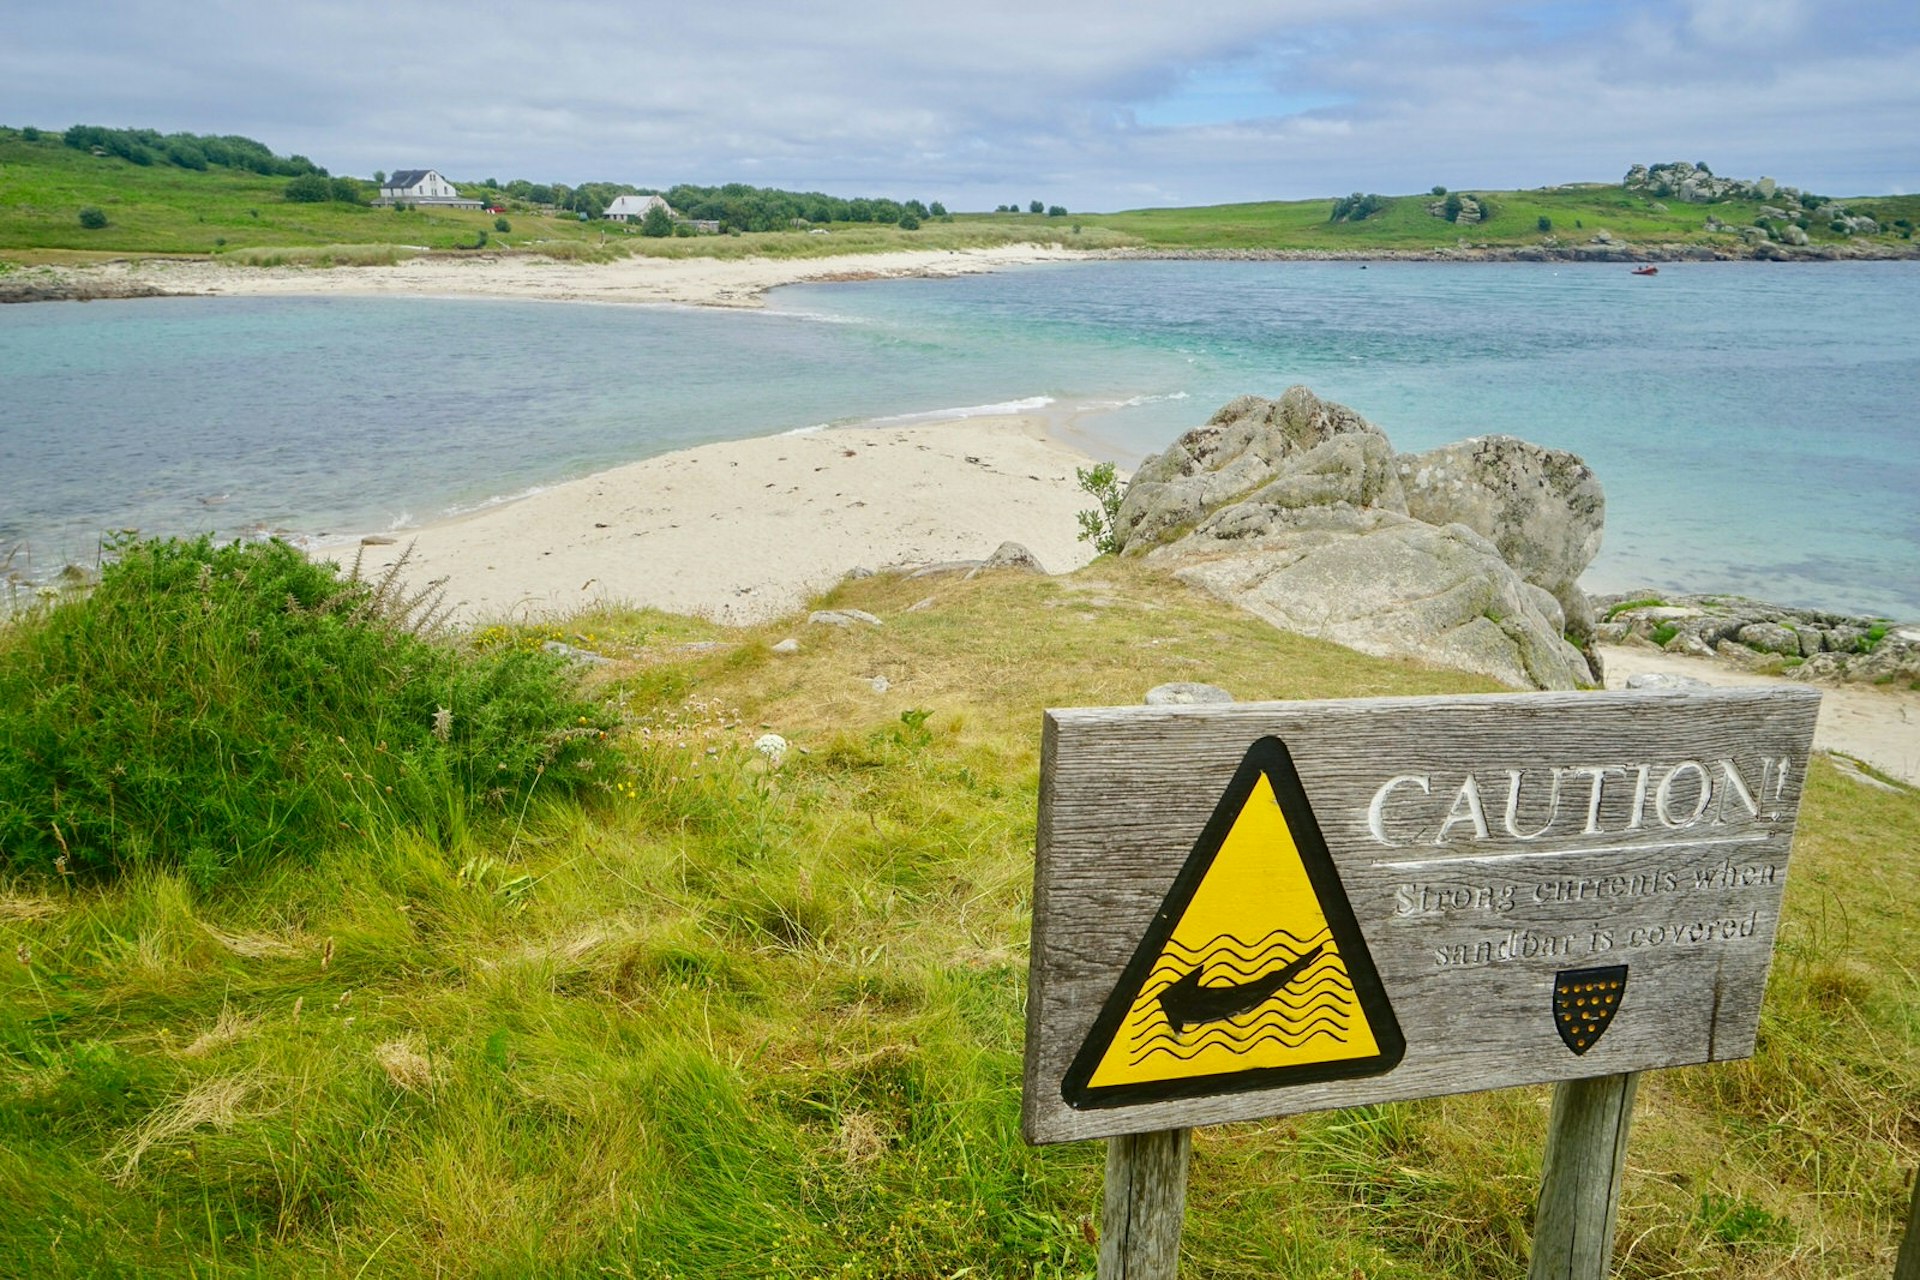 The tombolo (sandbar) linking St Agnes to Gugh, Isles of Scilly, England, UK © James Kay / Lonely Planet